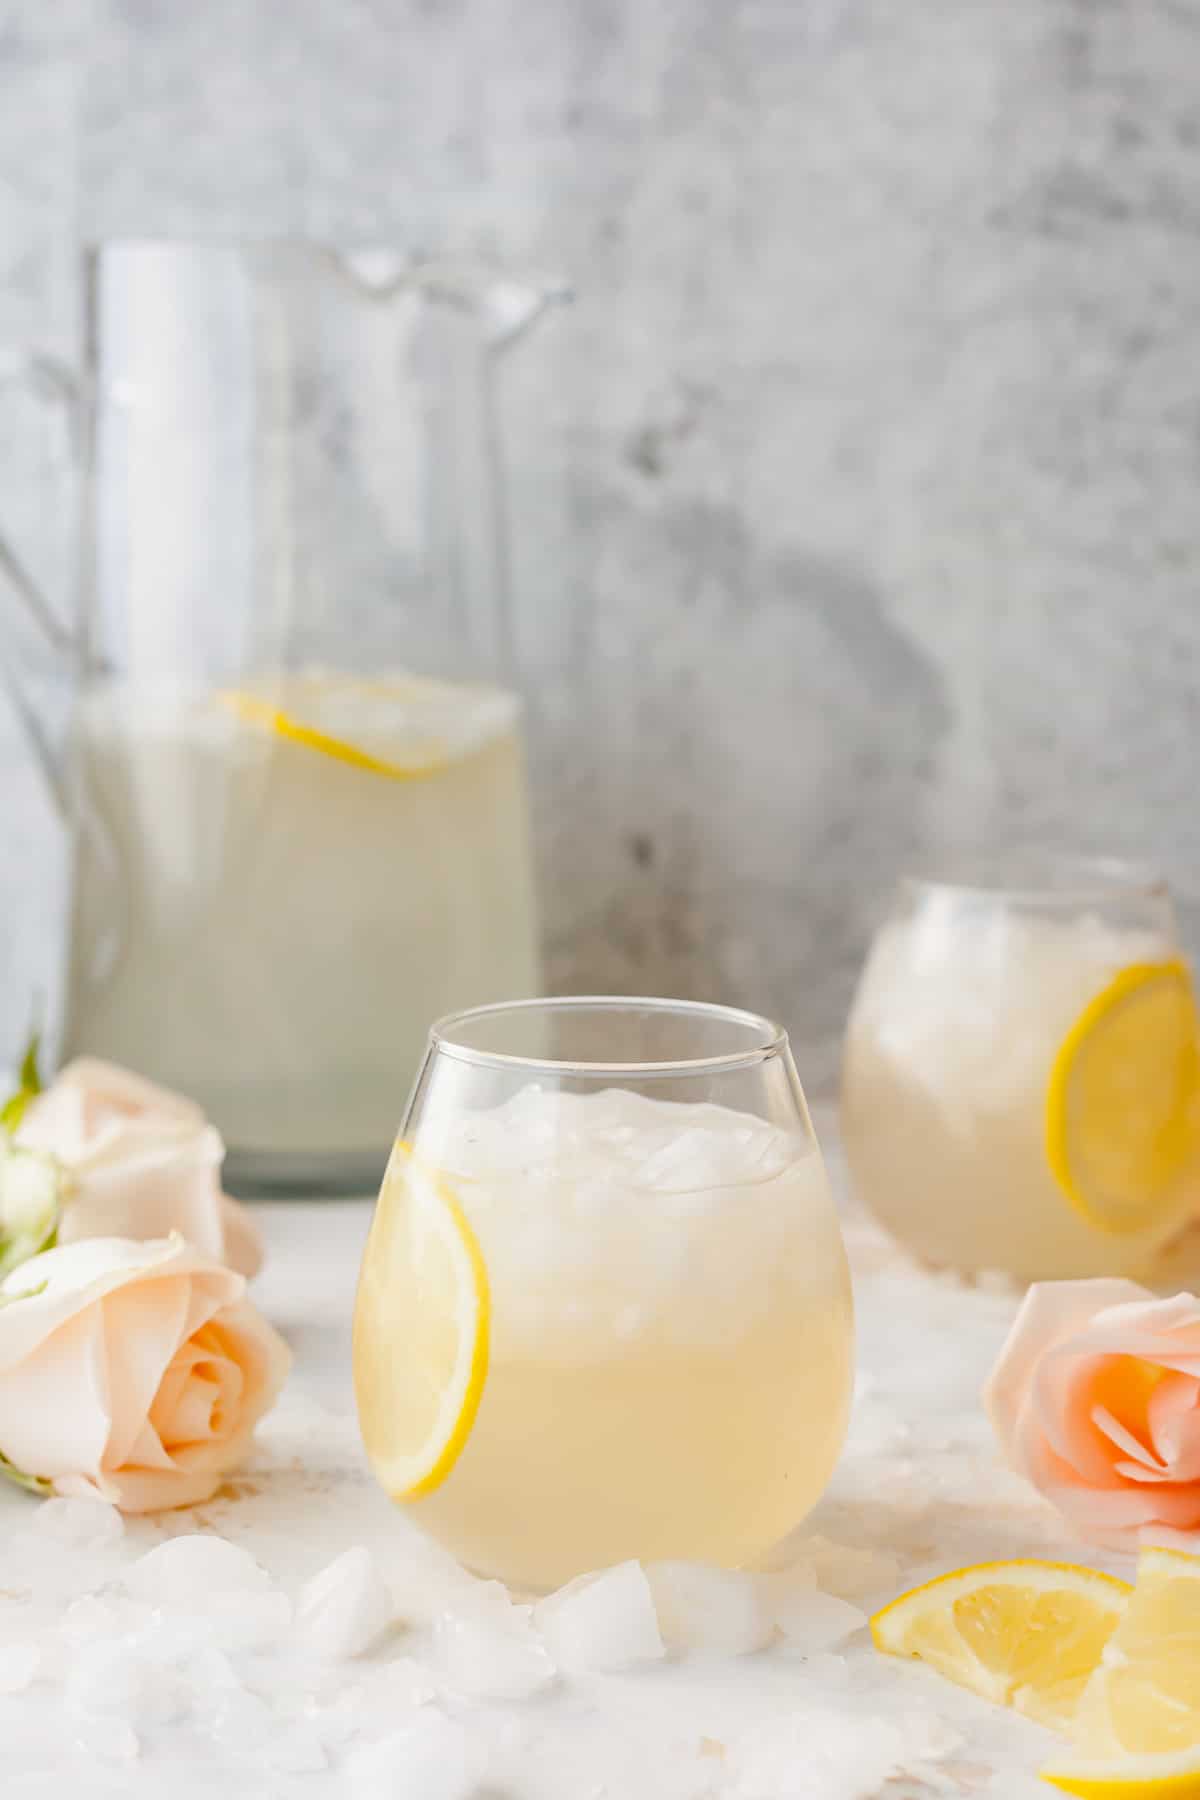 Rose water lemonade in a stemless wine glass with crushed ice and a lemon slice with pale pink roses and more lemon slices scattered around it. A tall glass pitcher of the lemonade in the background.